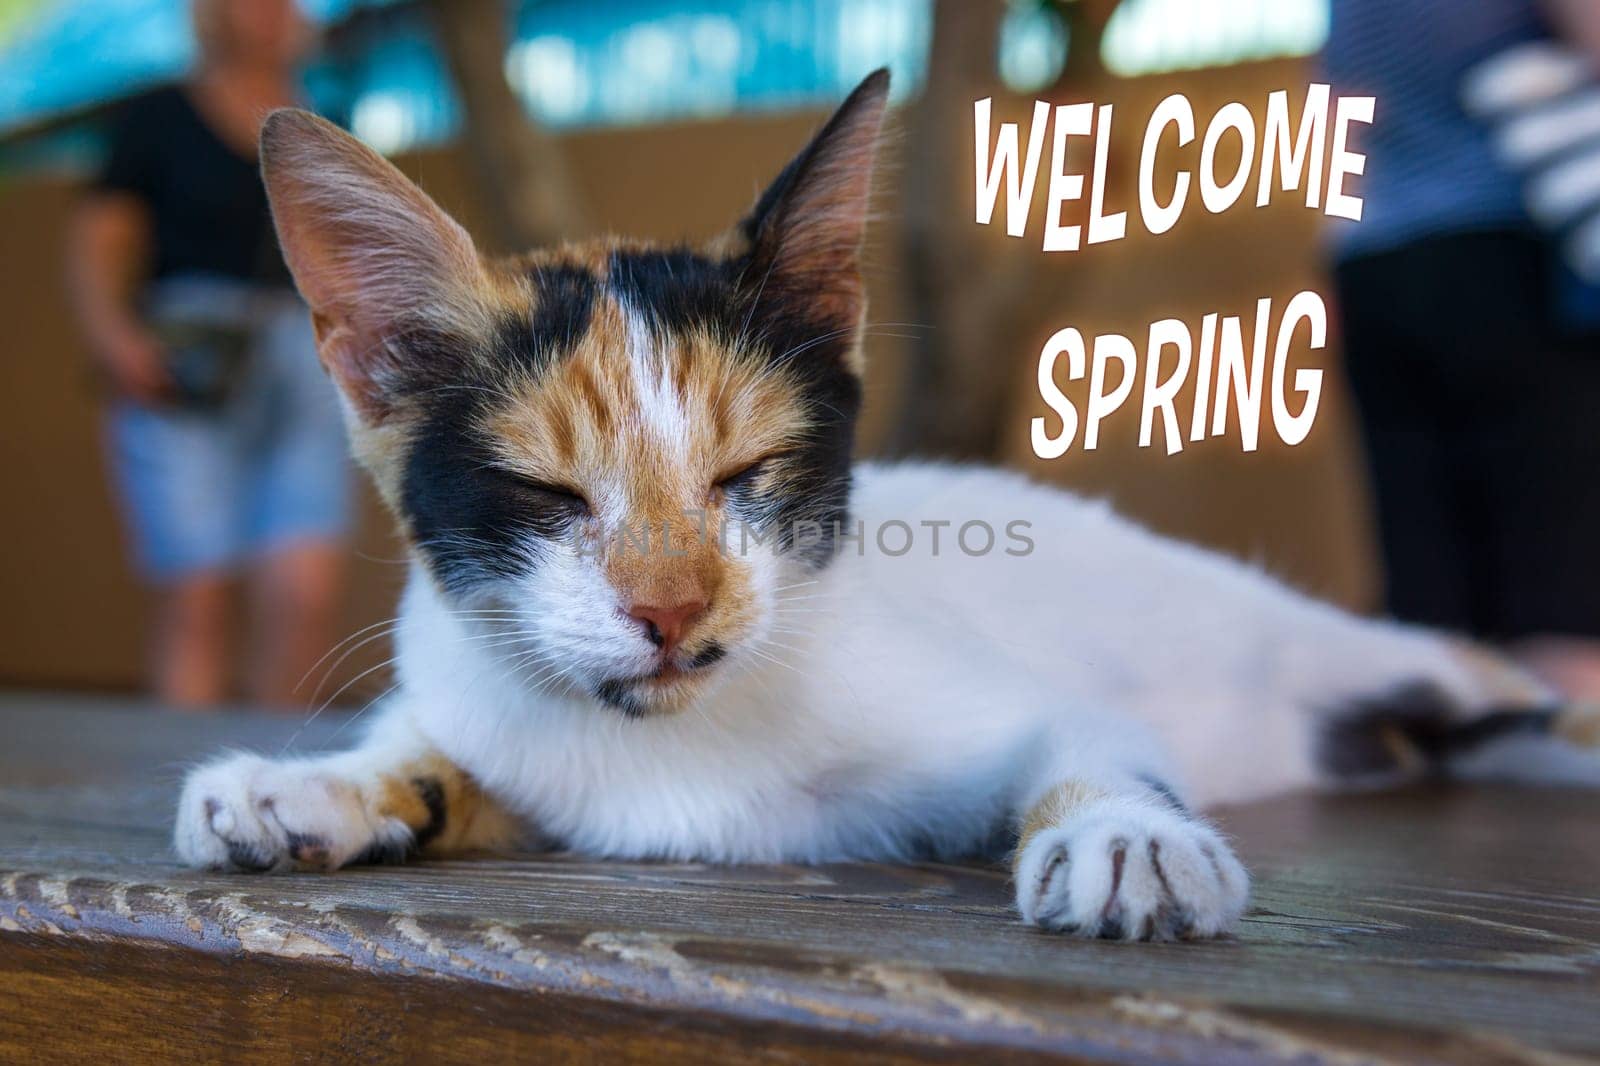 Graceful Feline Resting on a Wooden Surface. Welcome spring. Selective focus